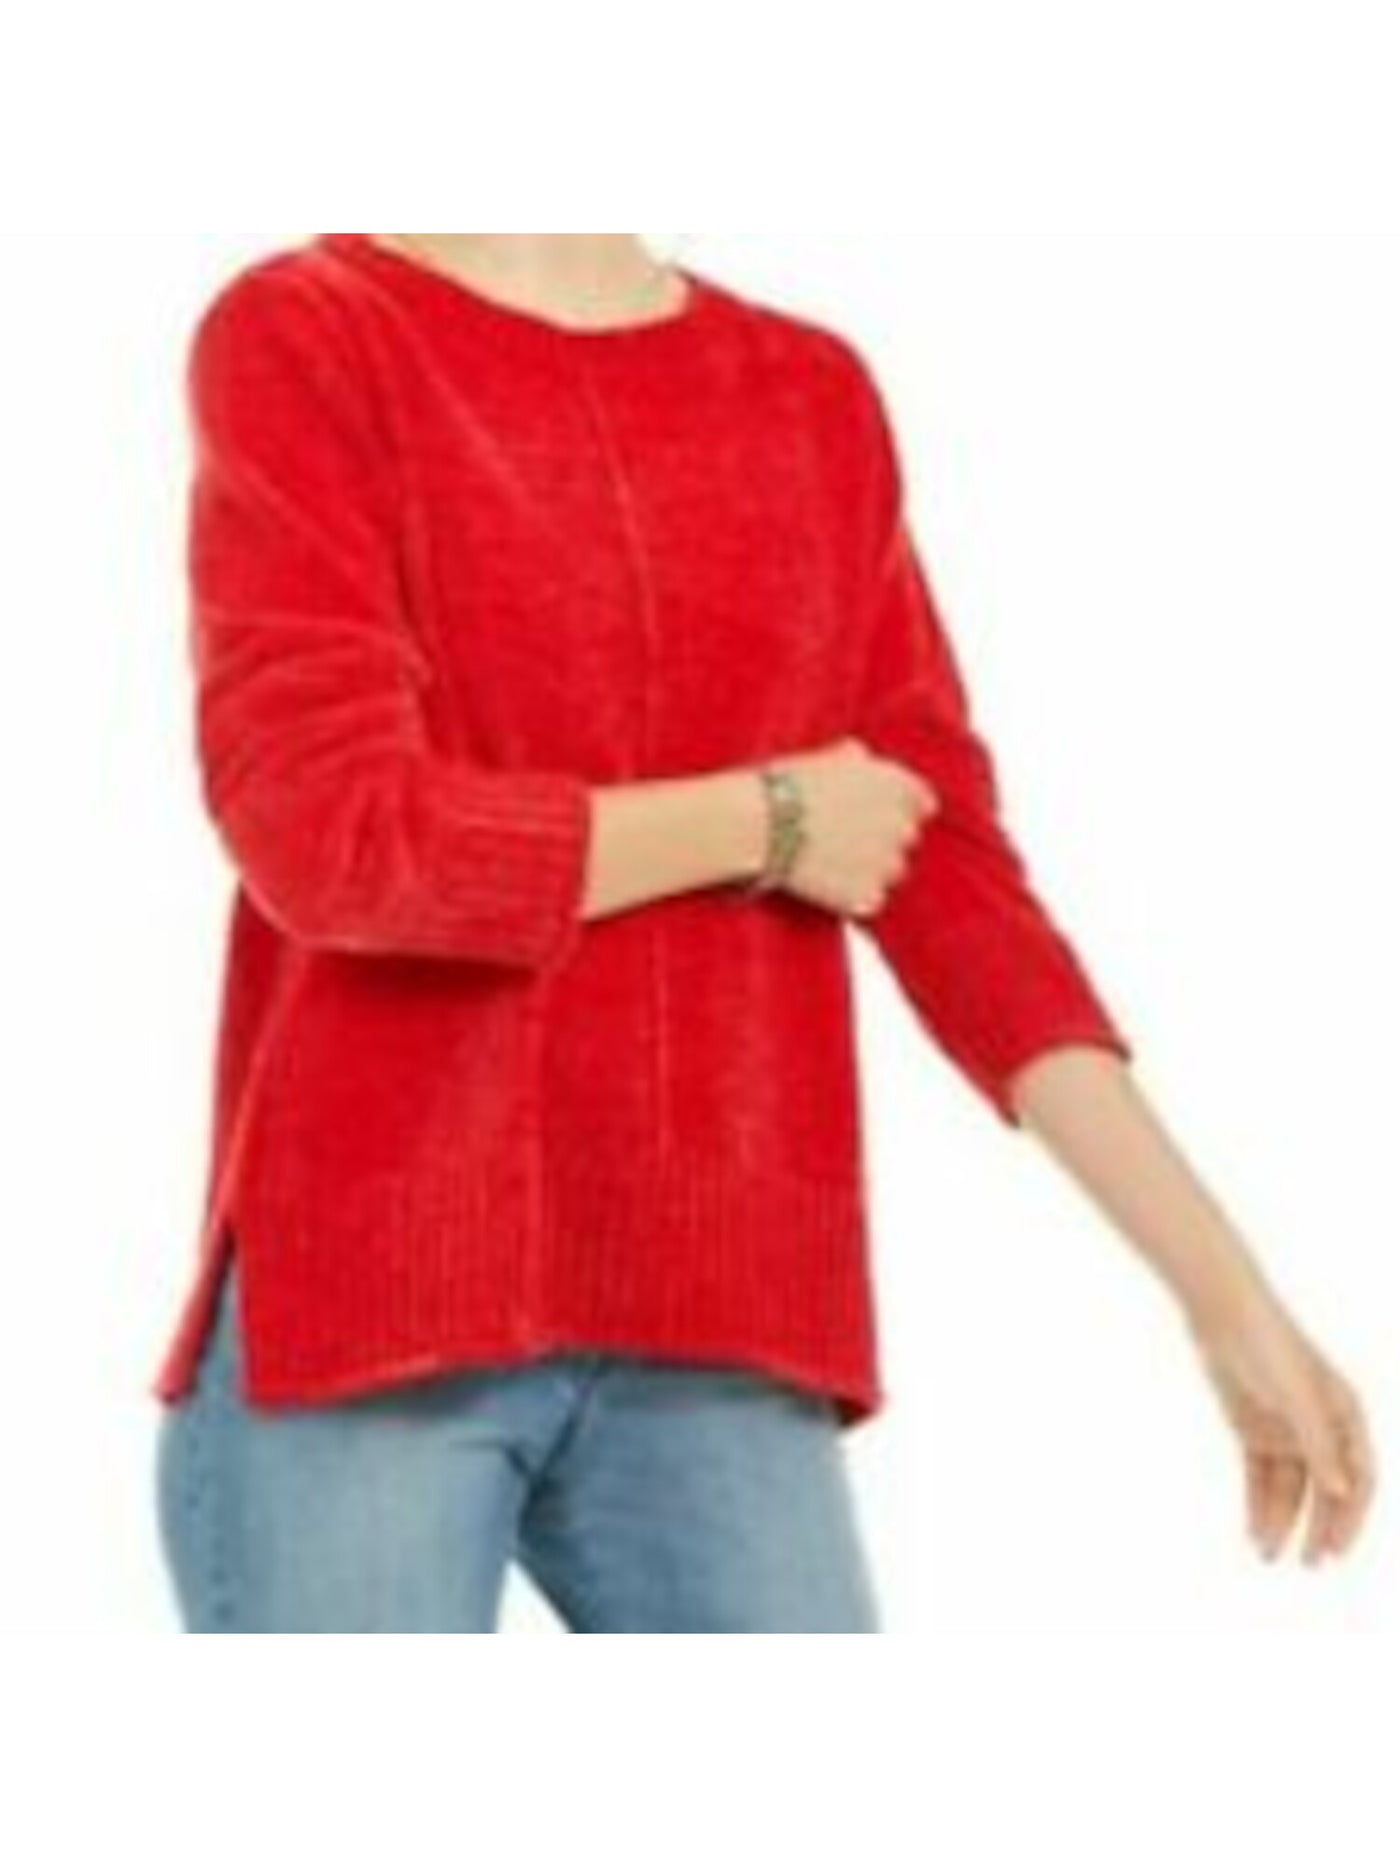 STYLE & COMPANY Womens Red Long Sleeve Crew Neck Sweater XL